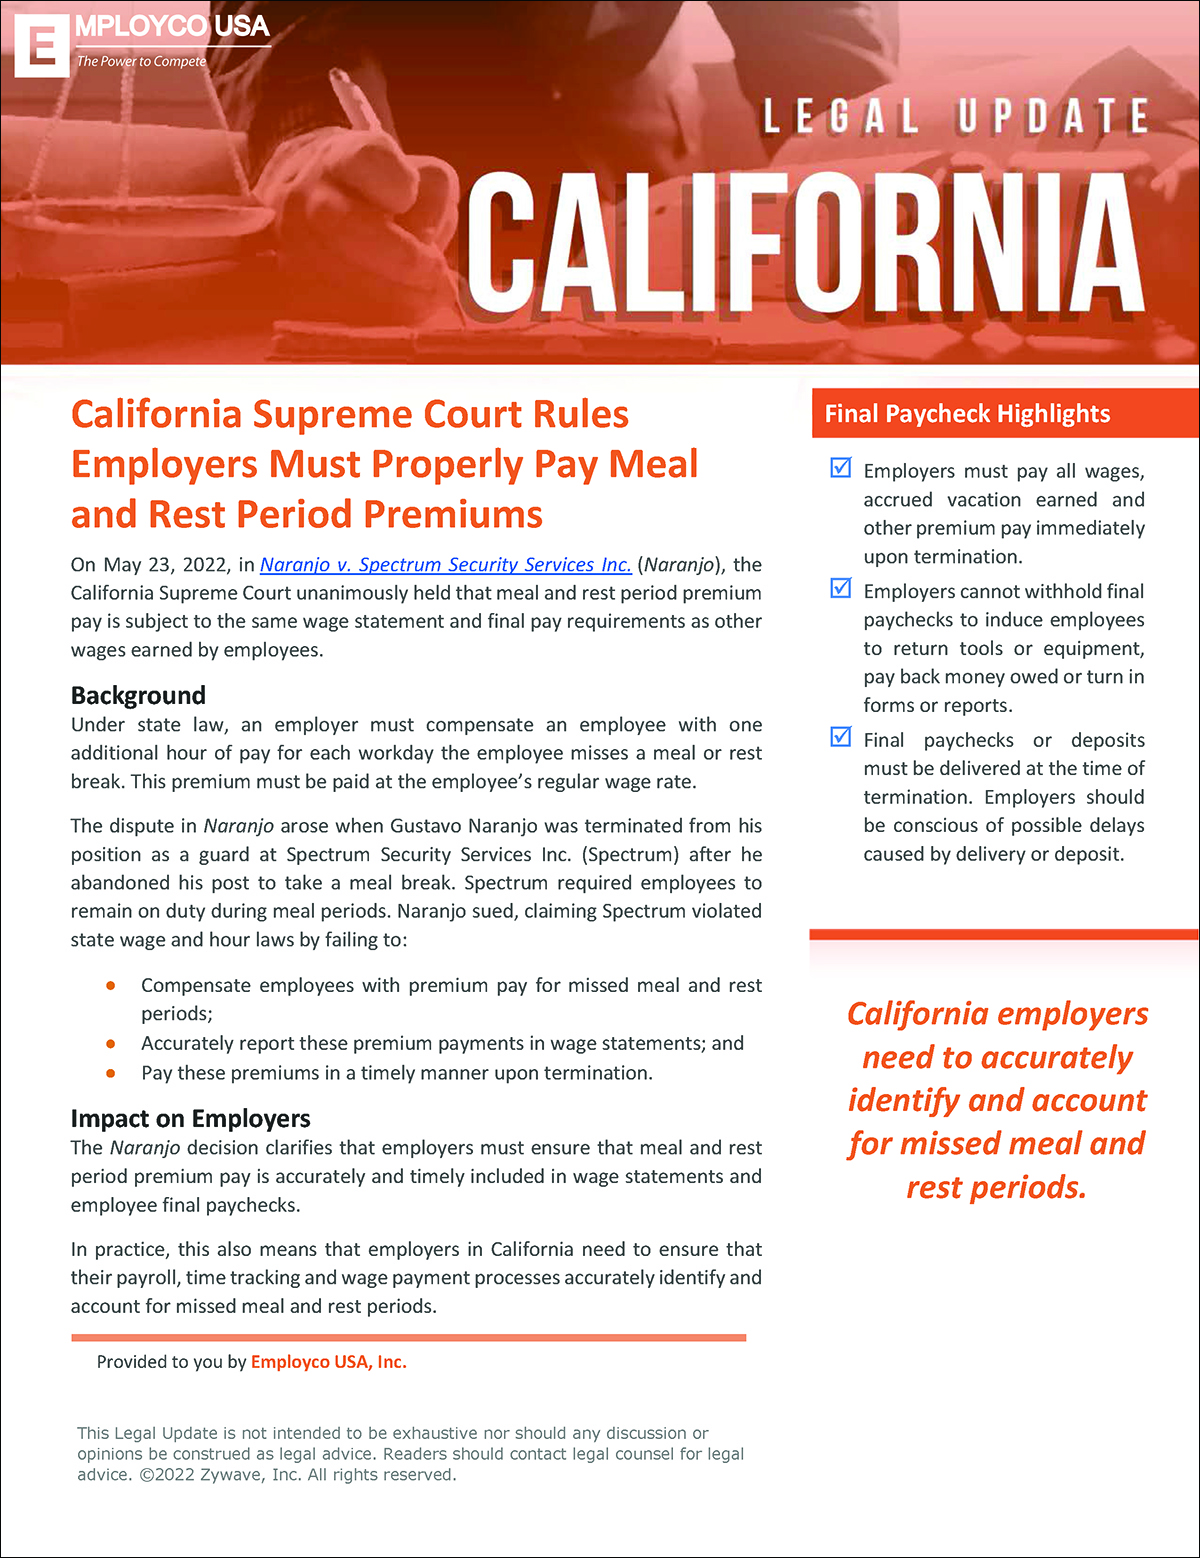 California Supreme Court Rules Employers Must Properly Pay Meal and Rest Period Premiums